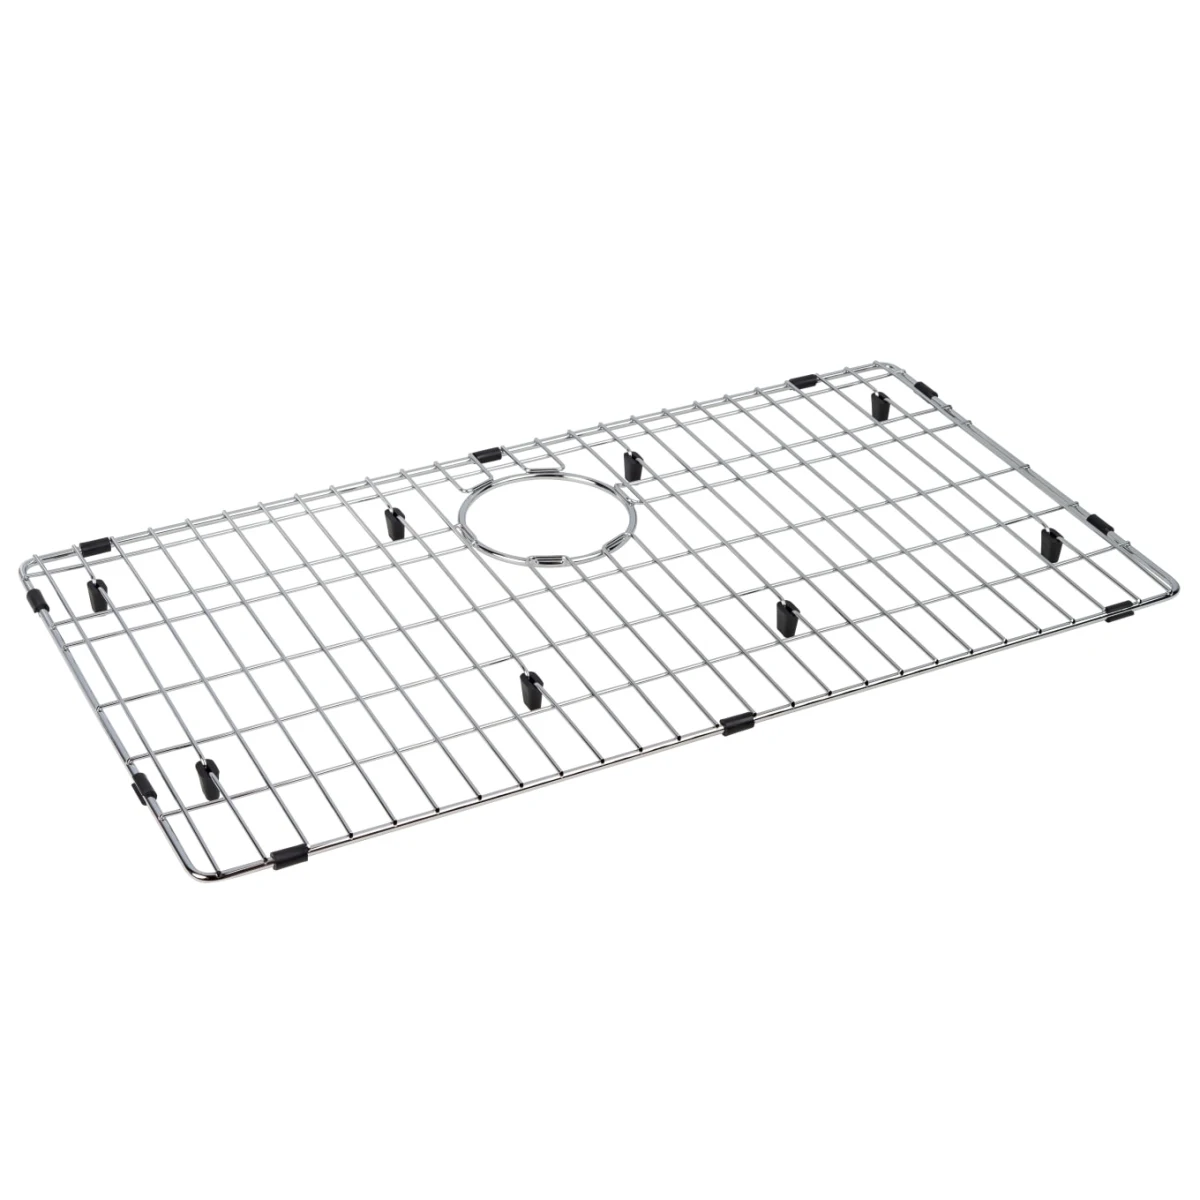 MISENO MNOWSGR2815 15 INCH STAINLESS STEEL SINK GRID - STAINLESS STEEL